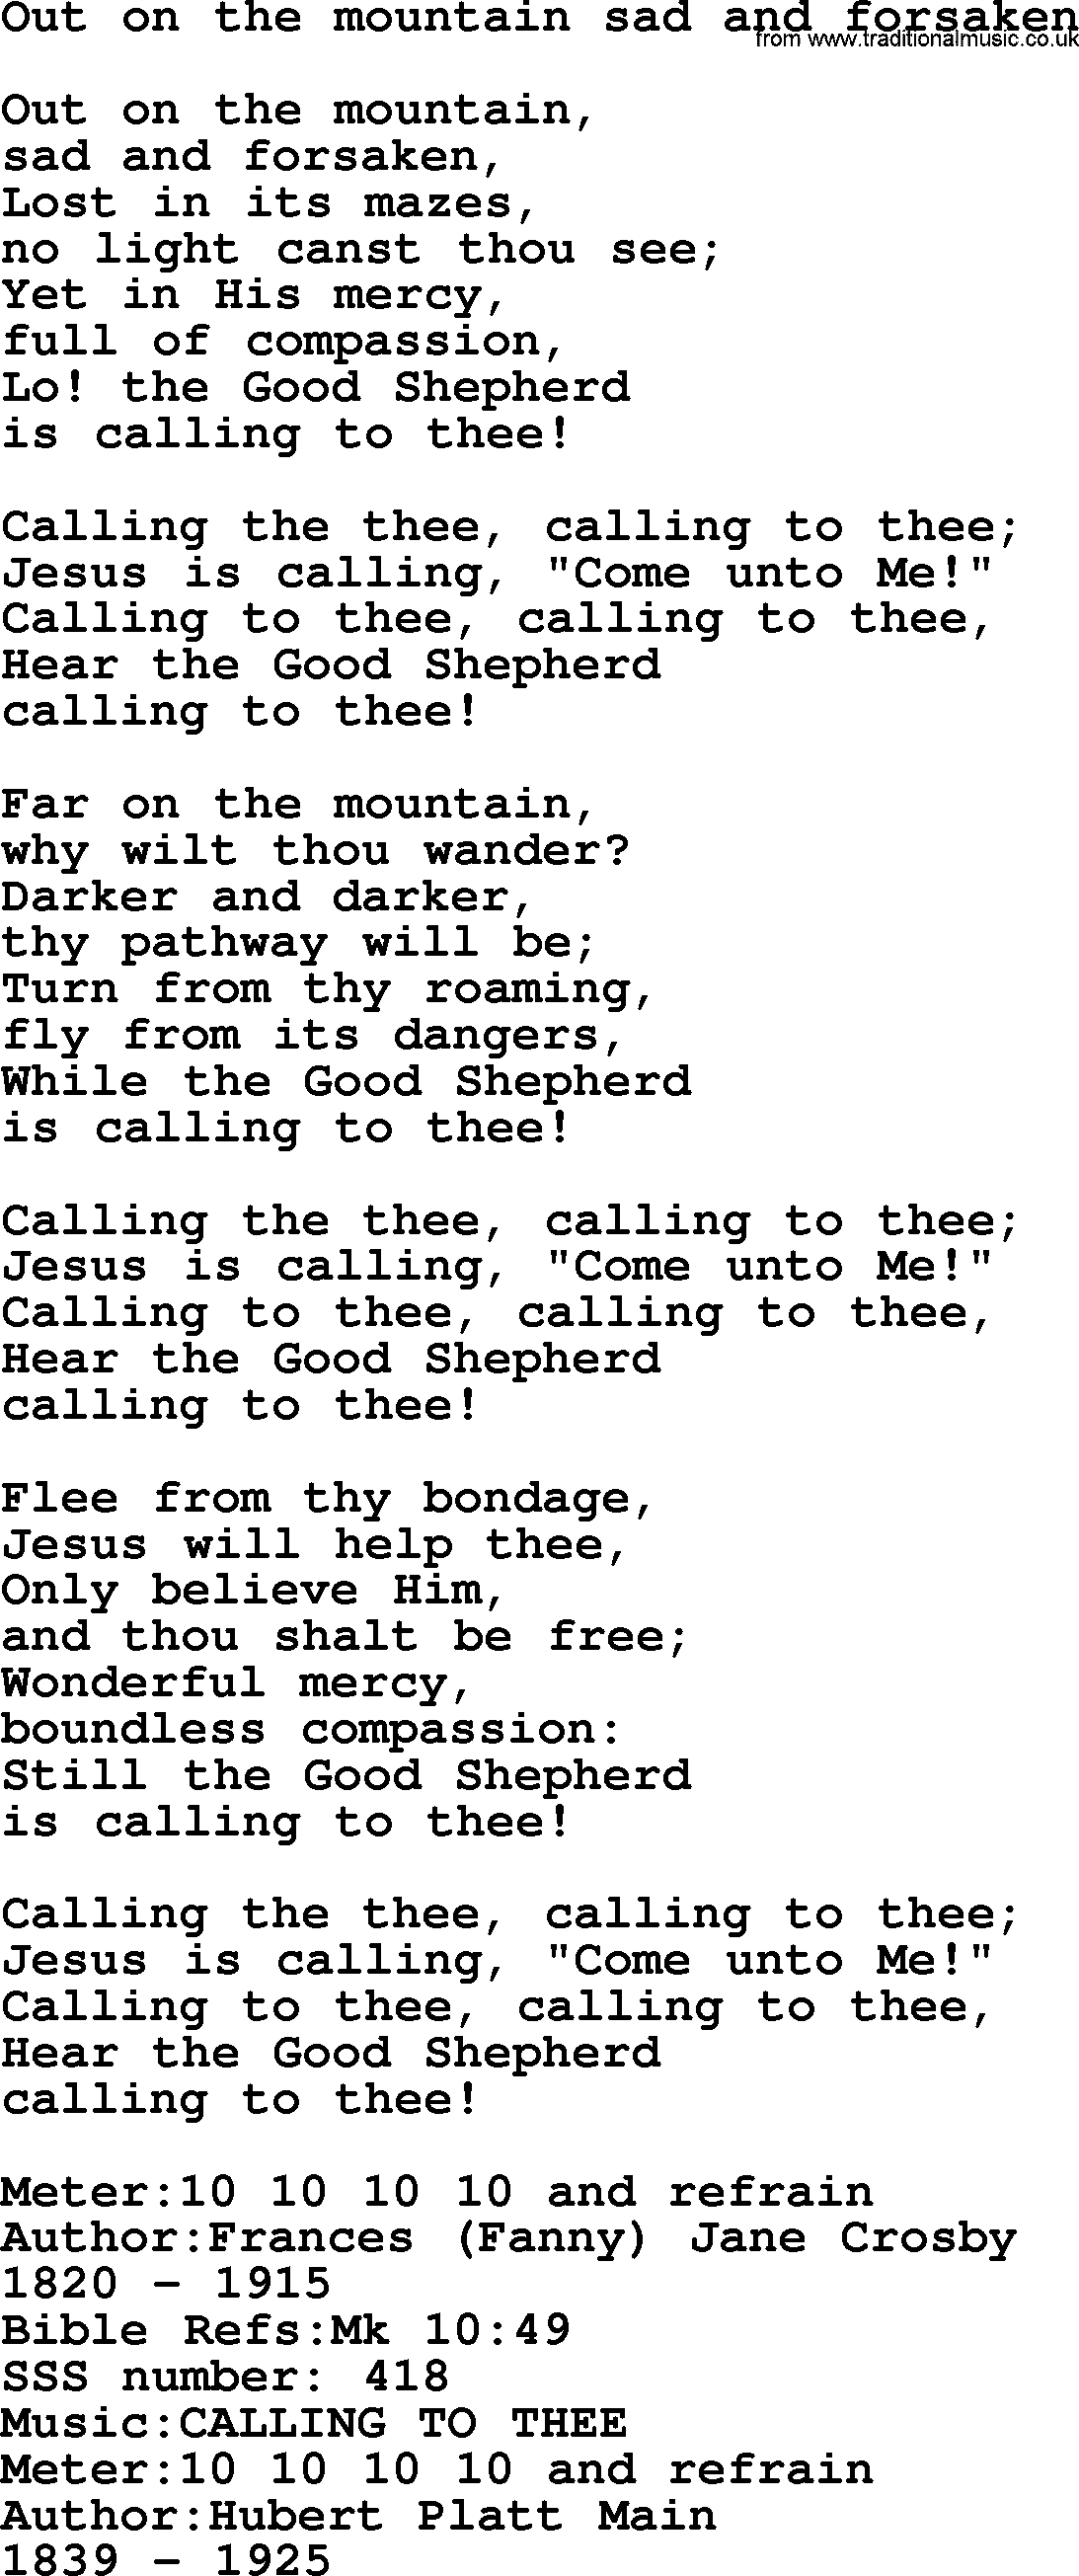 Sacred Songs and Solos complete, 1200 Hymns, title: Out On The Mountain Sad And Forsaken, lyrics and PDF